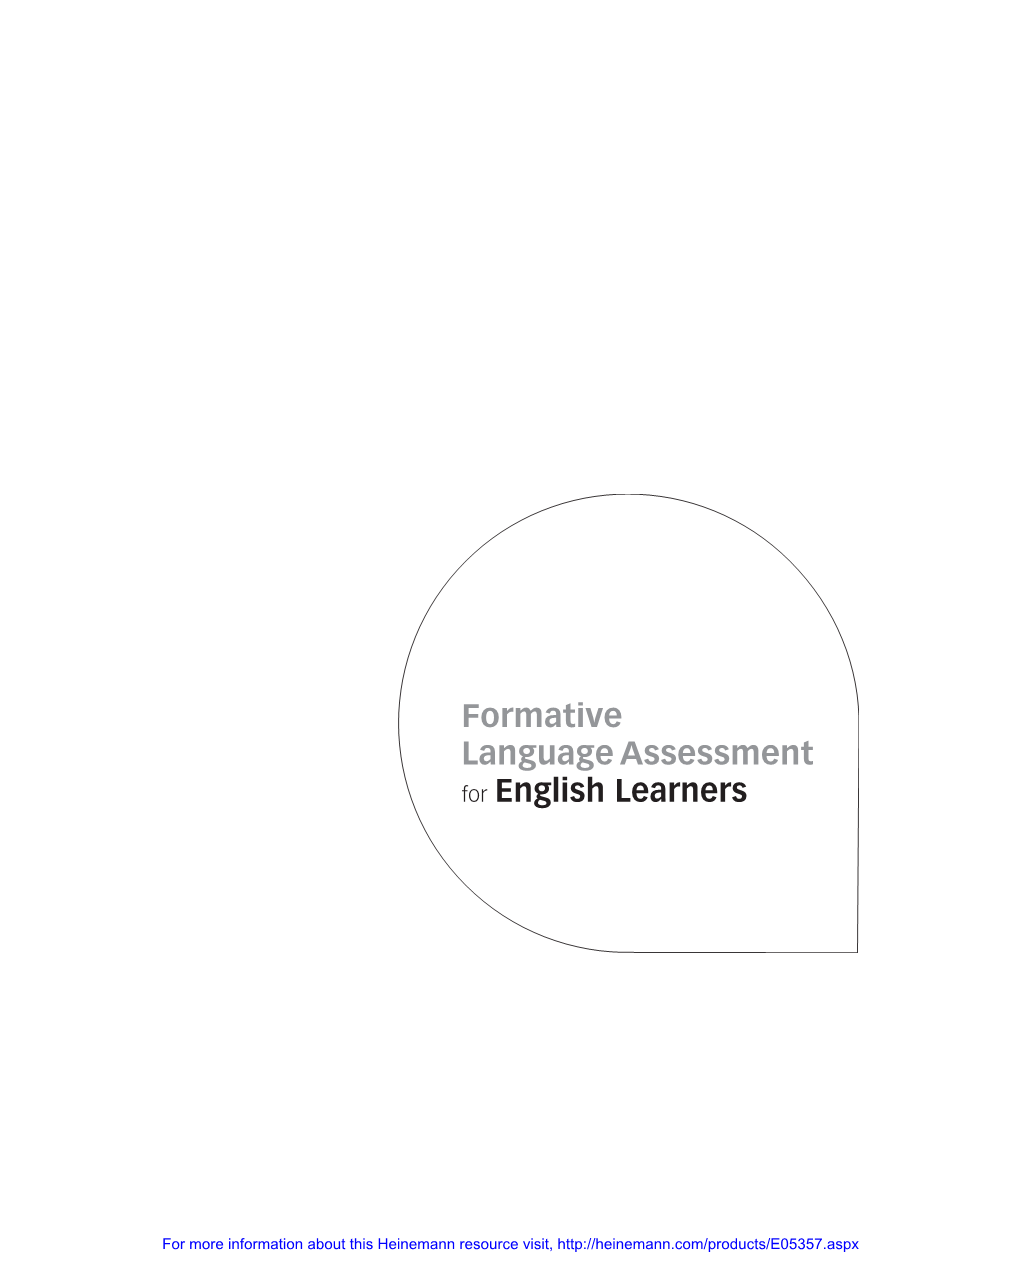 Formative Language Assessment for English Learners